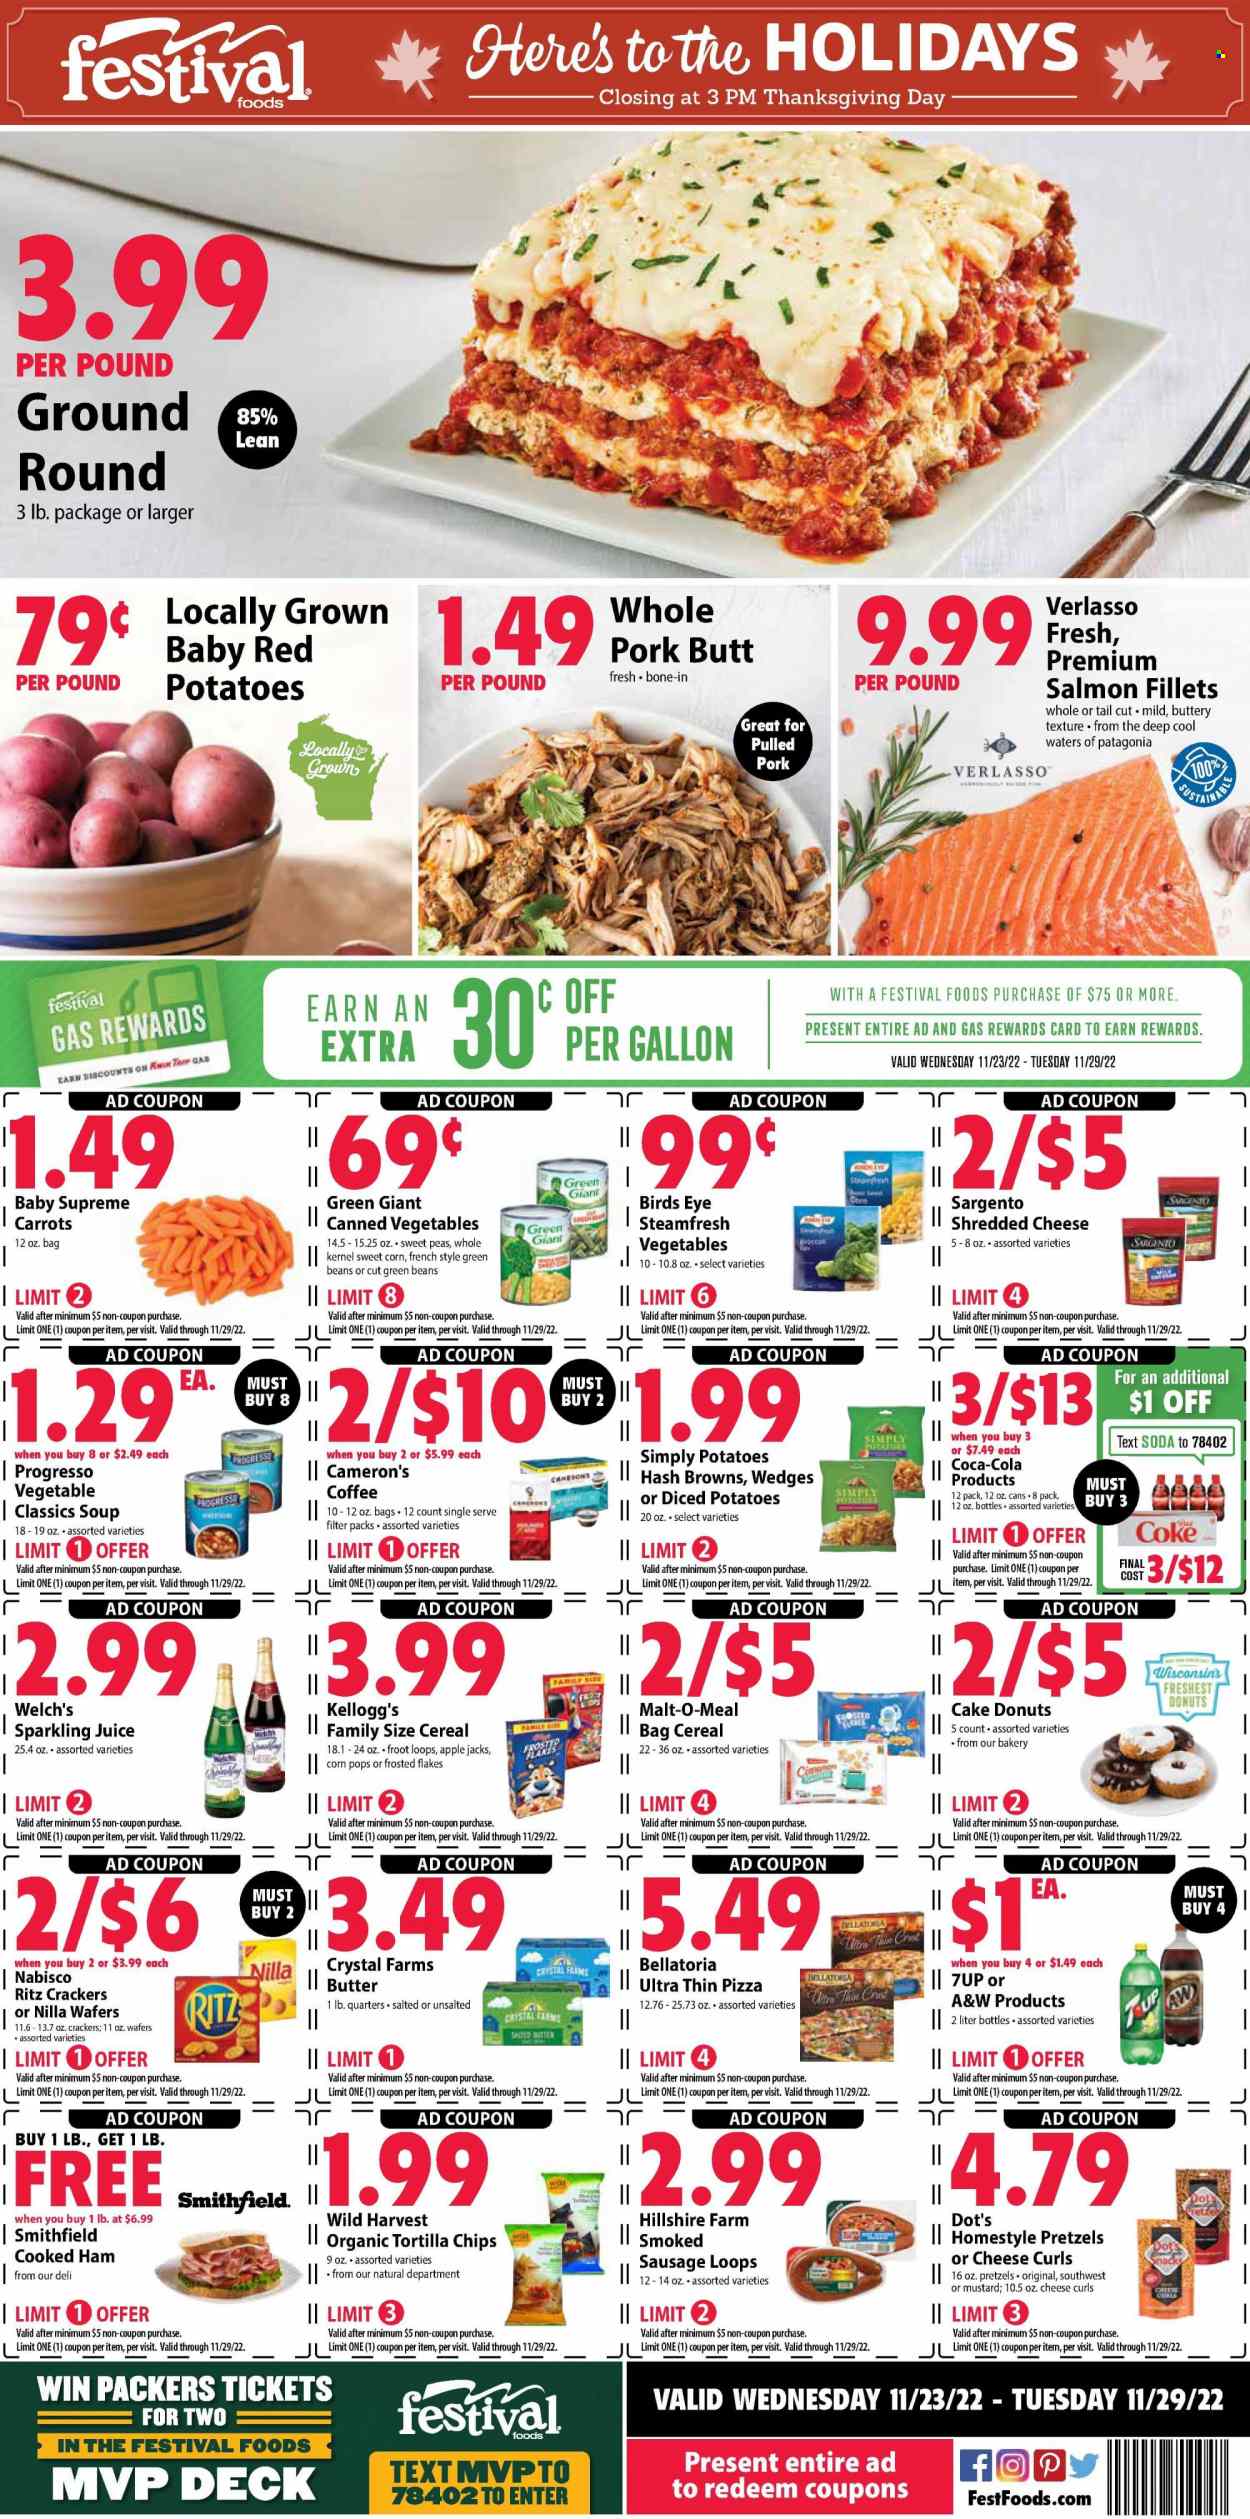 thumbnail - Festival Foods Flyer - 11/23/2022 - 11/29/2022 - Sales products - pretzels, cake, donut, carrots, green beans, potatoes, sweet corn, Wild Harvest, Welch's, salmon, salmon fillet, fish, pizza, soup, Bird's Eye, Progresso, pulled pork, cooked ham, ham, Hillshire Farm, sausage, shredded cheese, Sargento, butter, salted butter, hash browns, Bellatoria, wafers, crackers, Kellogg's, RITZ, tortilla chips, chips, malt, canned vegetables, cereals, Frosted Flakes, Corn Pops, mustard, Coca-Cola, juice, 7UP, A&W, sparkling juice, soda, coffee, pork meat, Crest. Page 1.